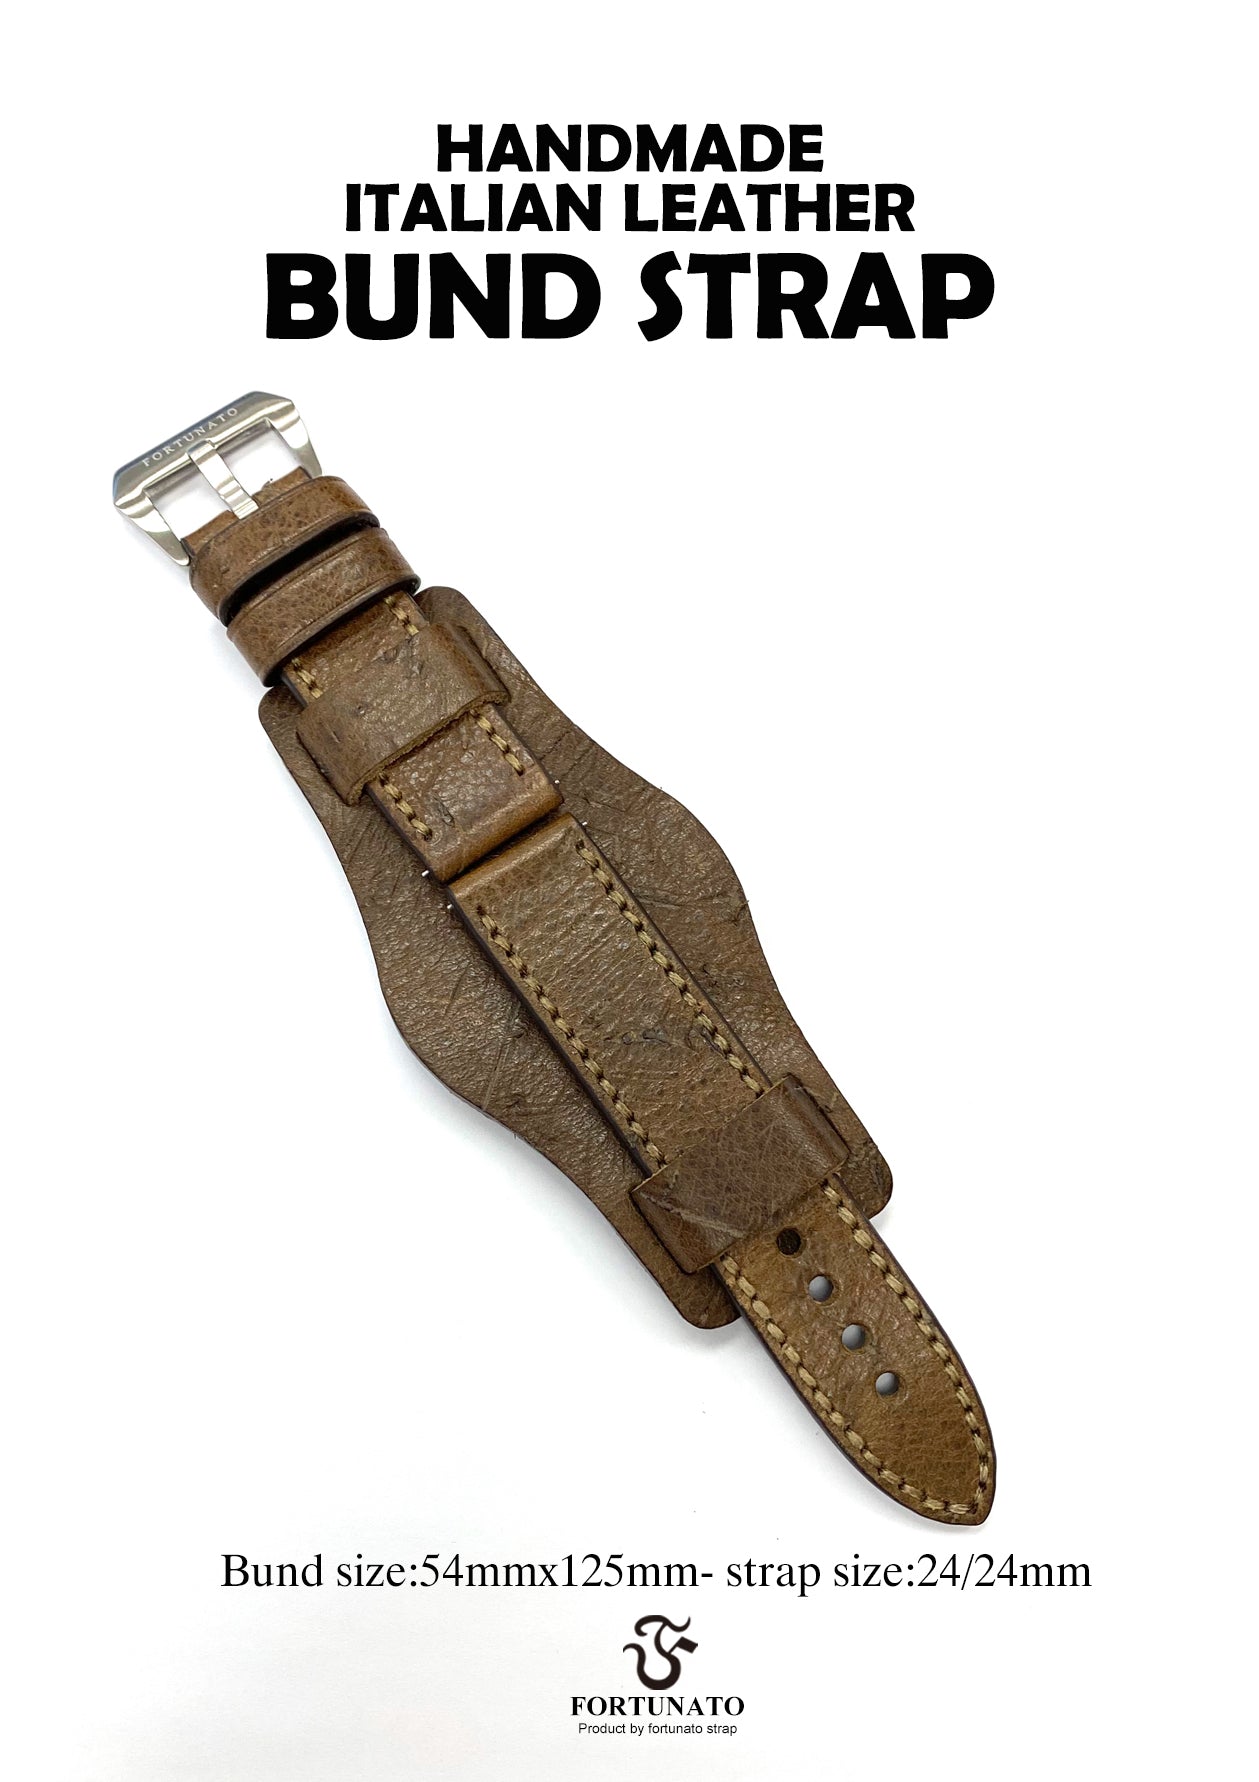 Making a Bund Style Leather Watchband - YouTube